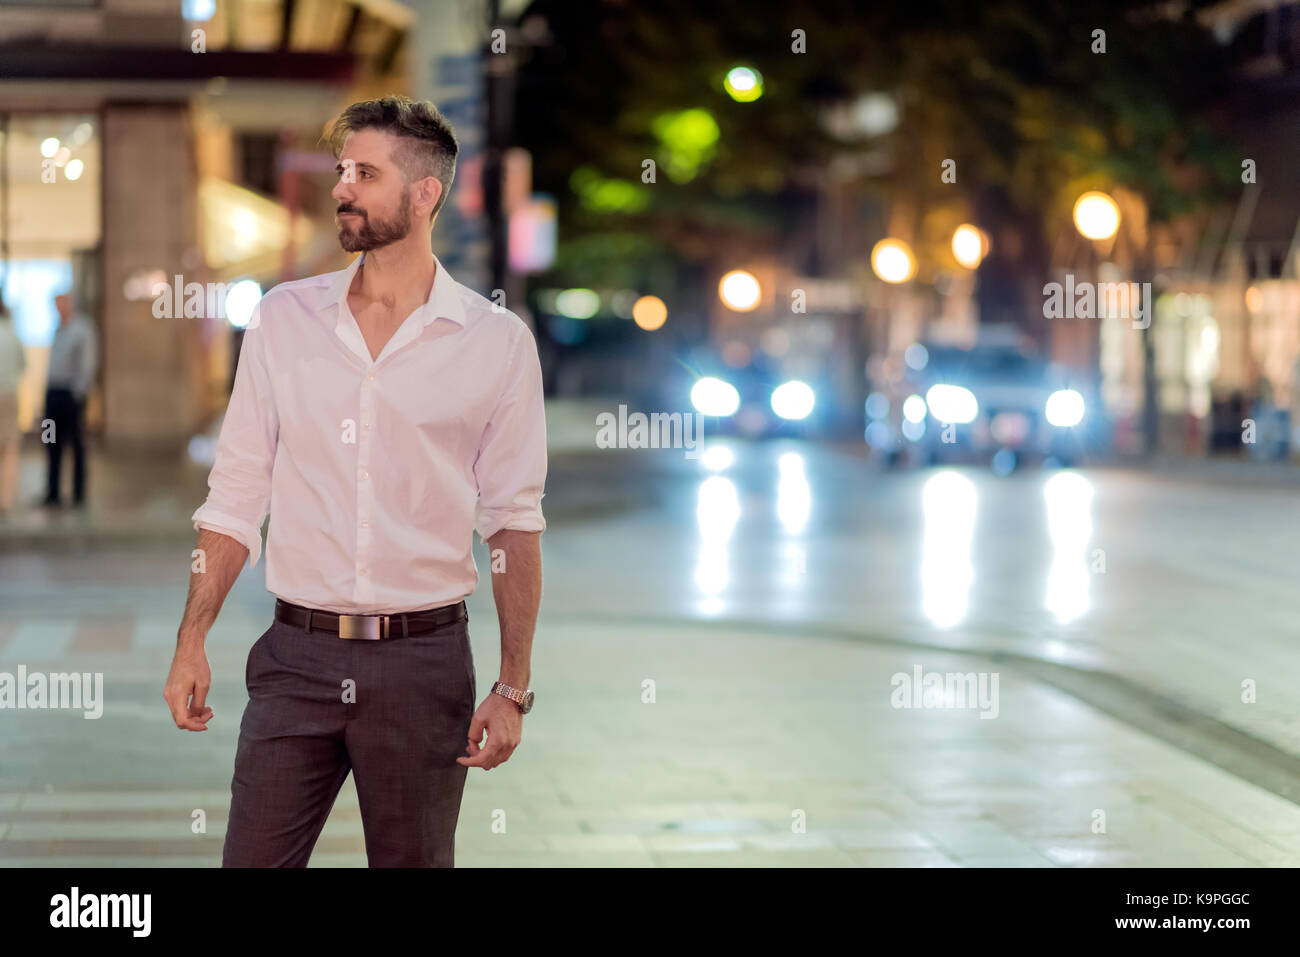 Handsome caucasian male professional photographed on the street at night standing on corner of intersection with background traffic. Stock Photo